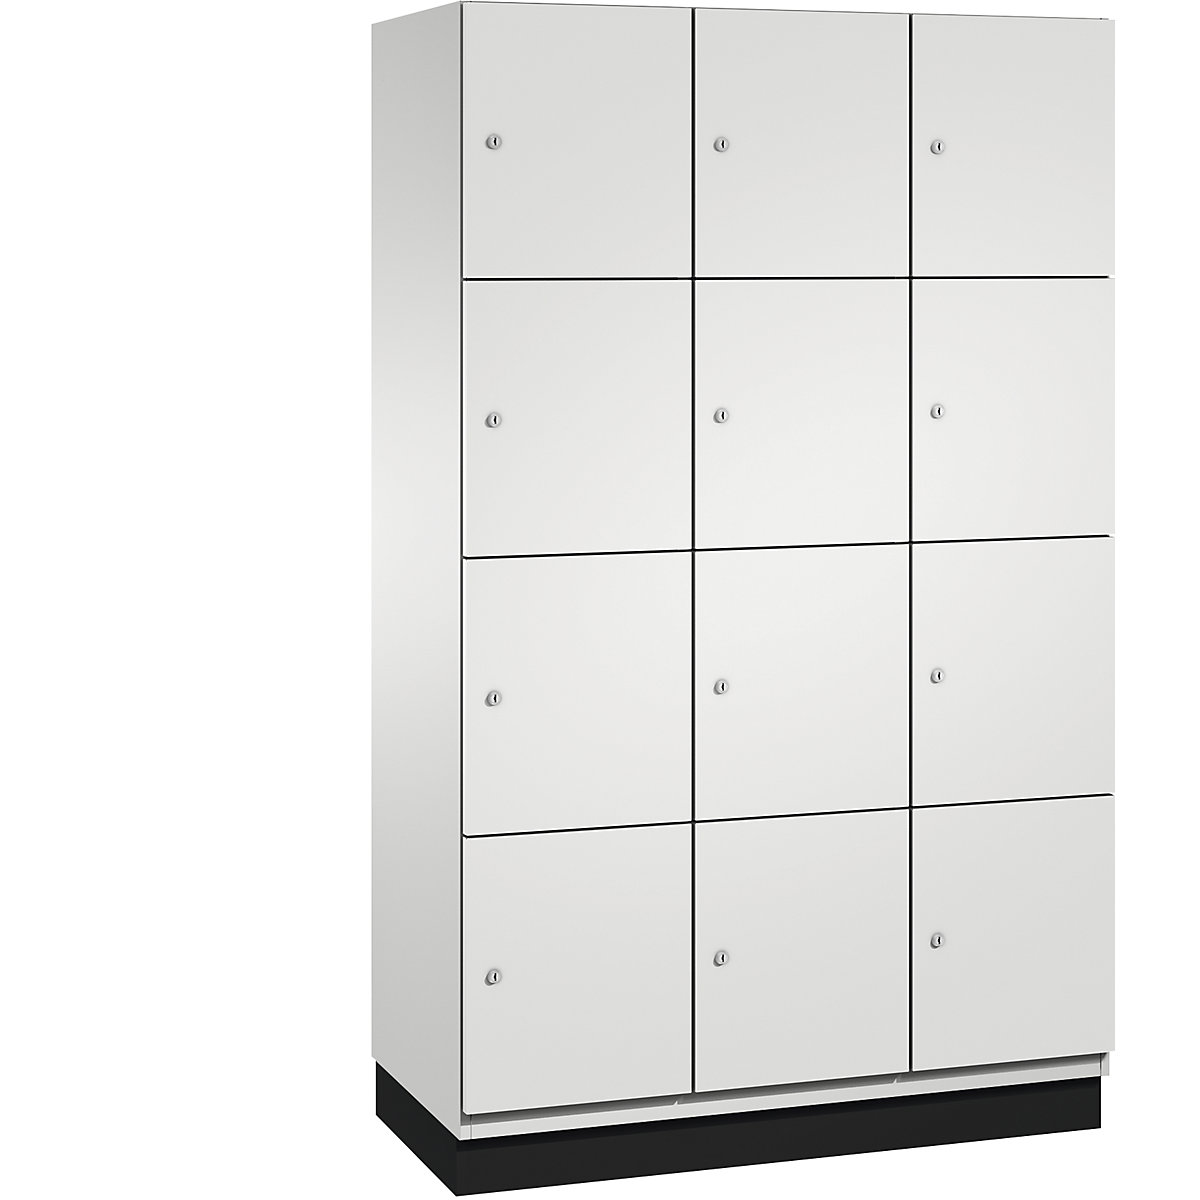 CAMBIO compartment locker with sheet steel doors – C+P, 12 compartments, width 1200 mm, body light grey / door light grey, compartment height 462.5 mm-11